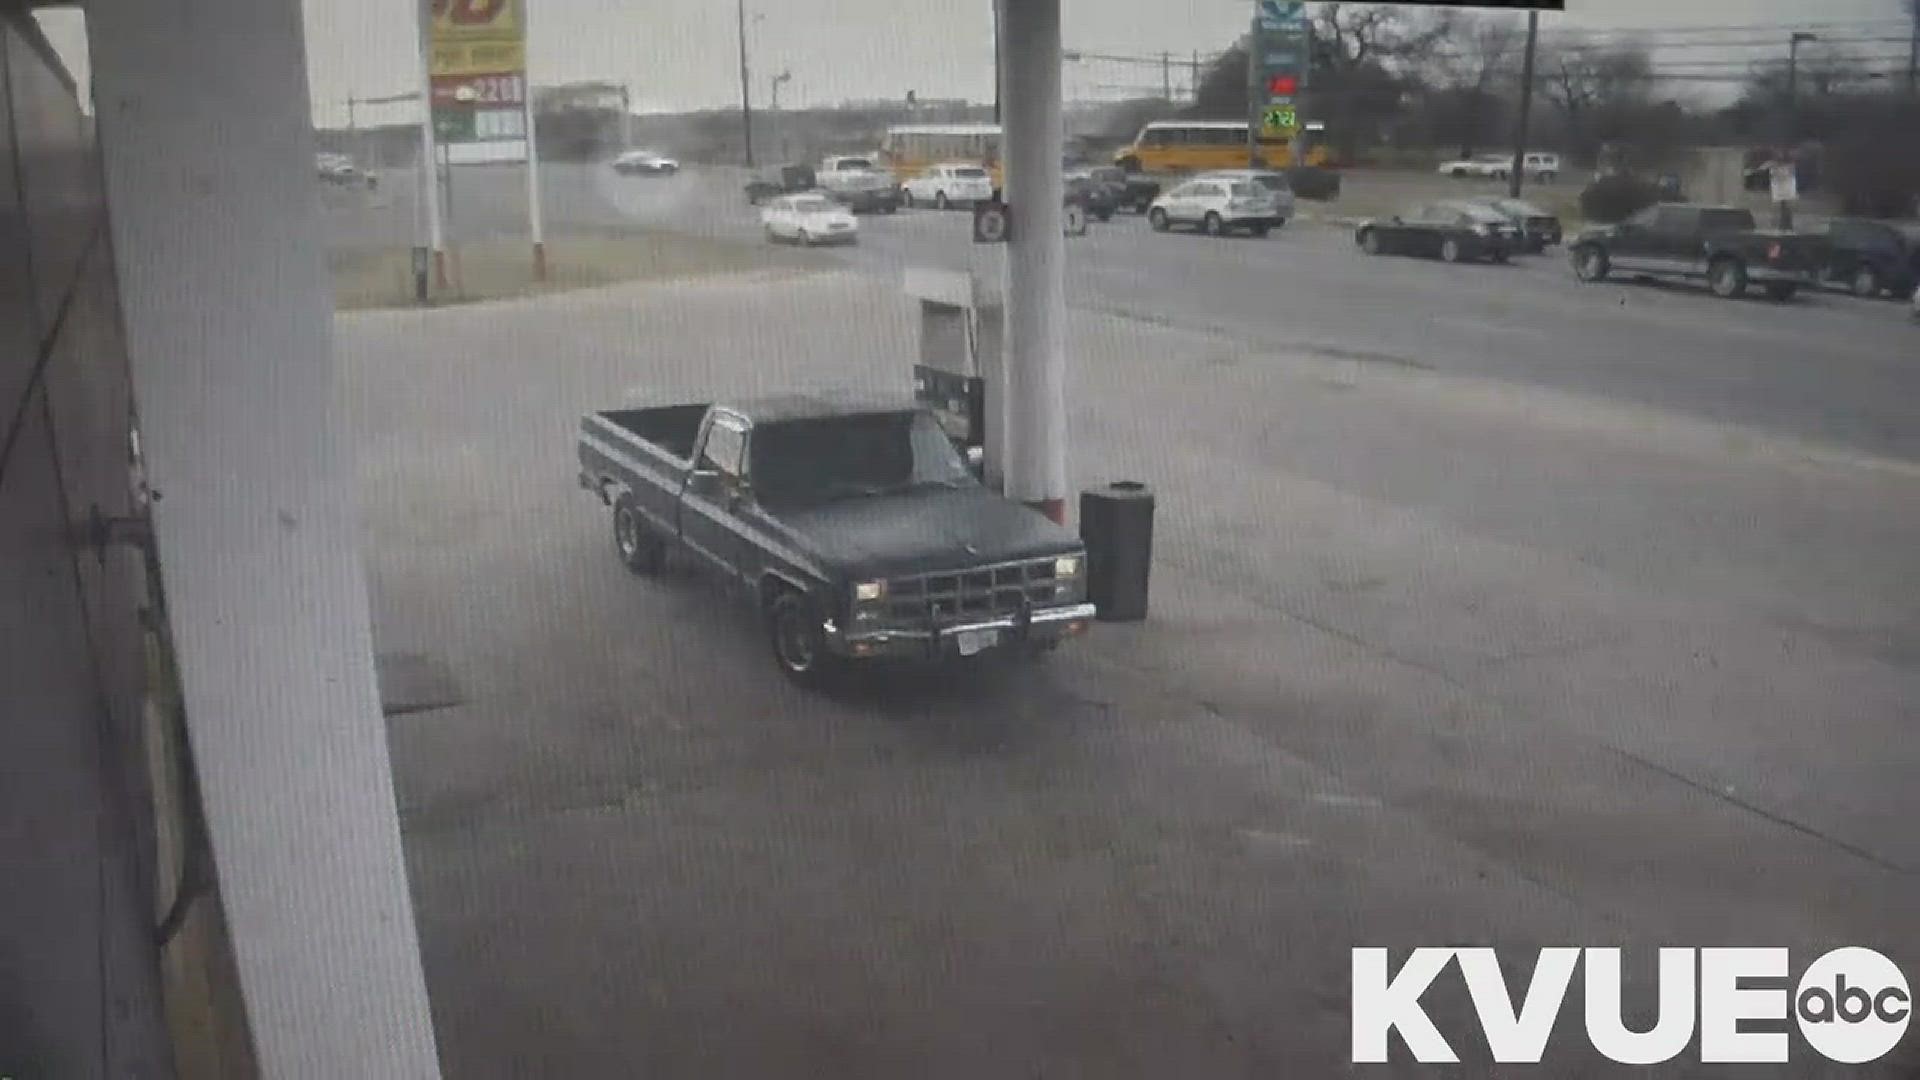 In surveillance video obtained by KVUE Tuesday, a DPS trooper's vehicle can be seen slamming into the front of a school bus.